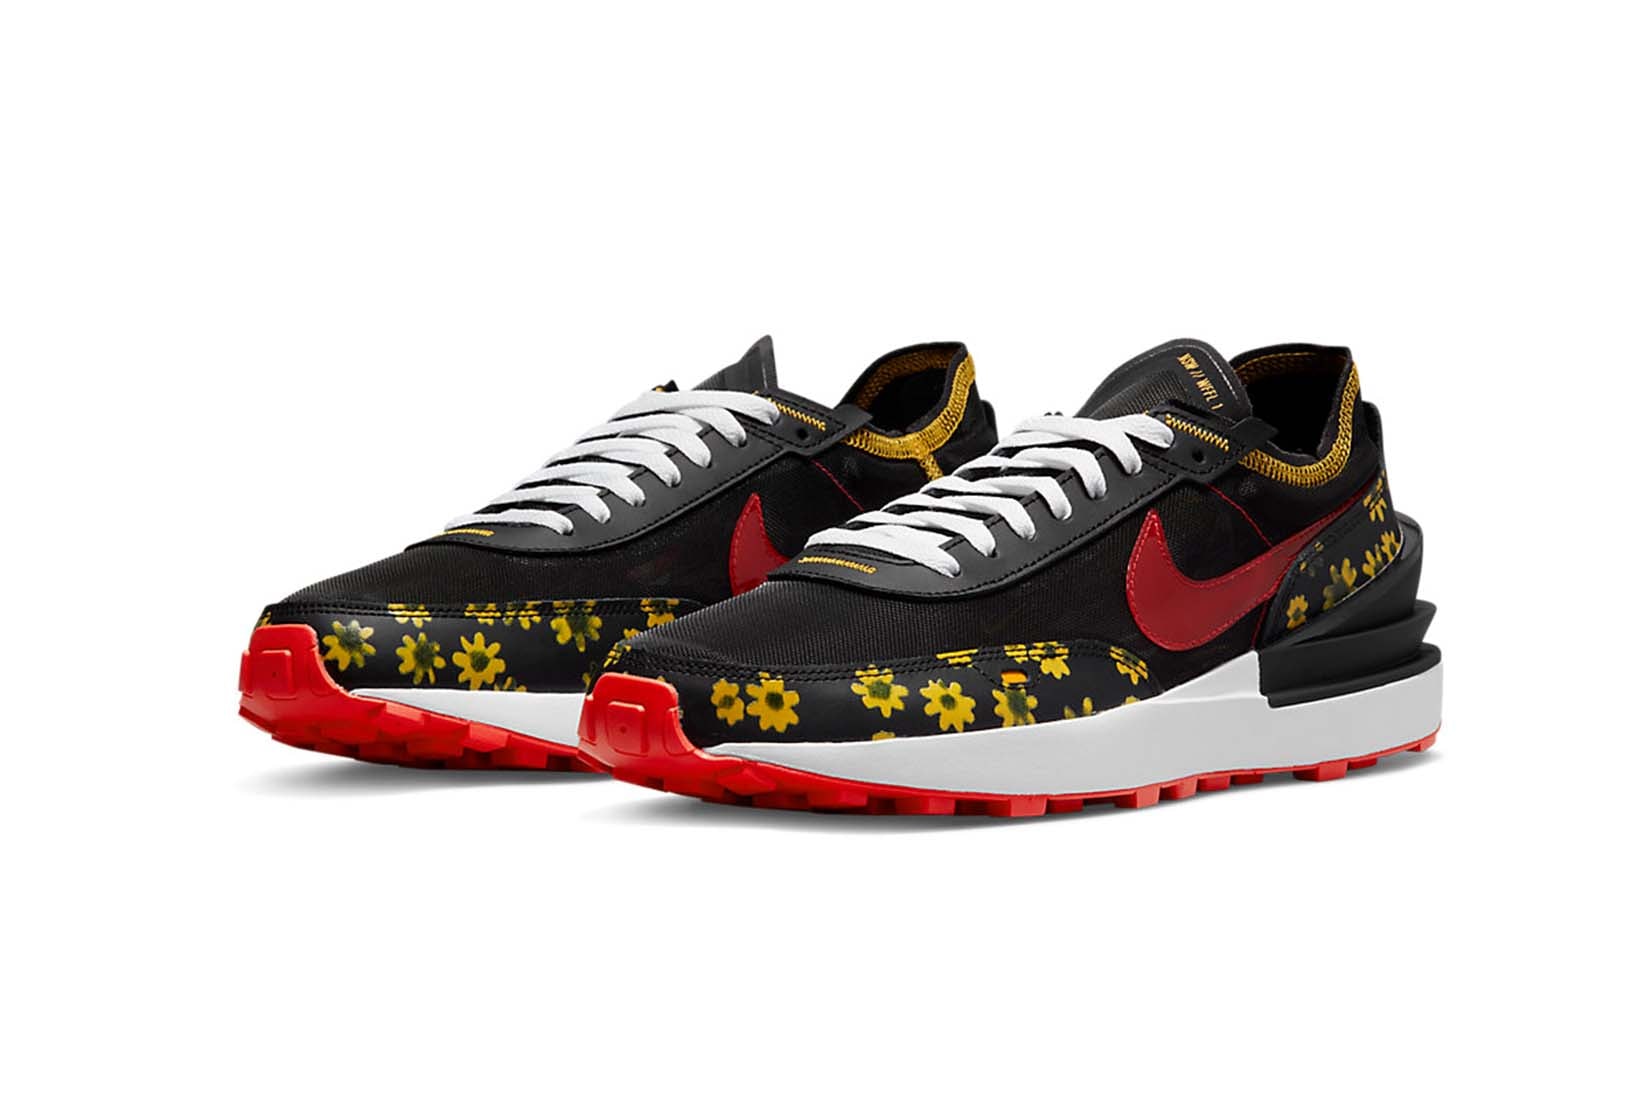 Nike Waffle One Racer Sunflower Black Red Yellow Price Release Date